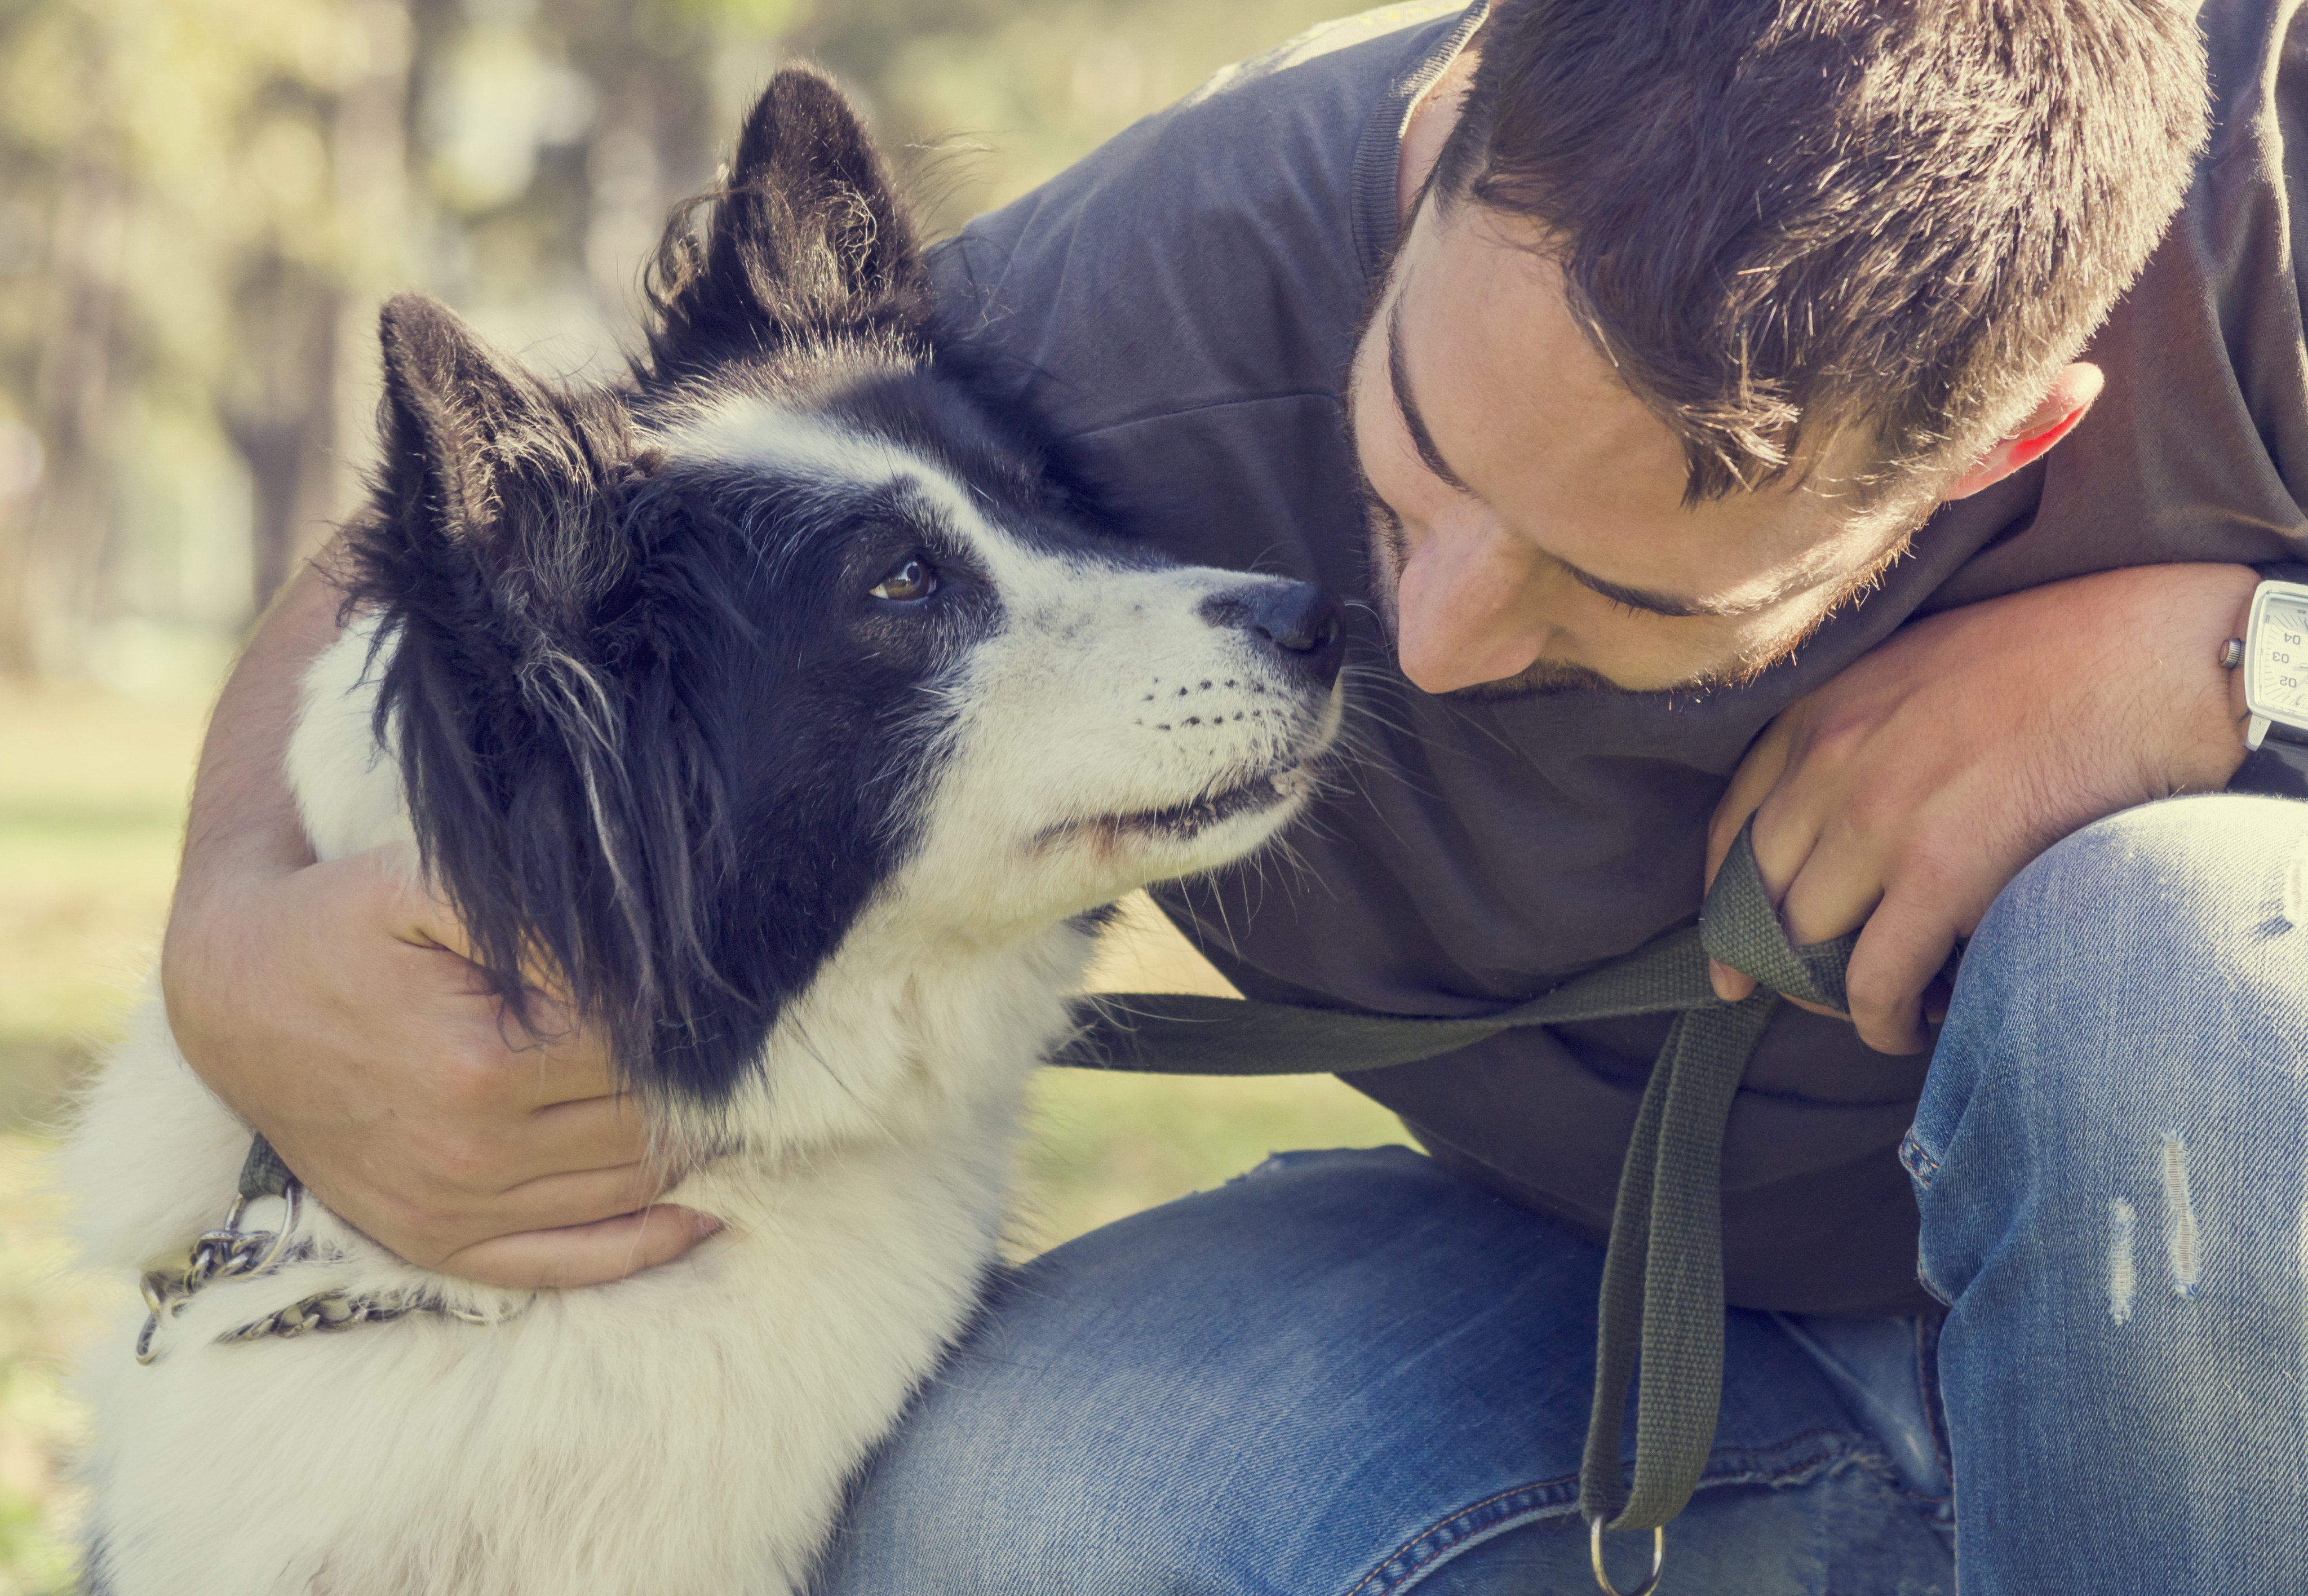 Positive pet ownership is linked with a number of health benefits in owners, including healthier hearts and brains. Photo: Shutterstock